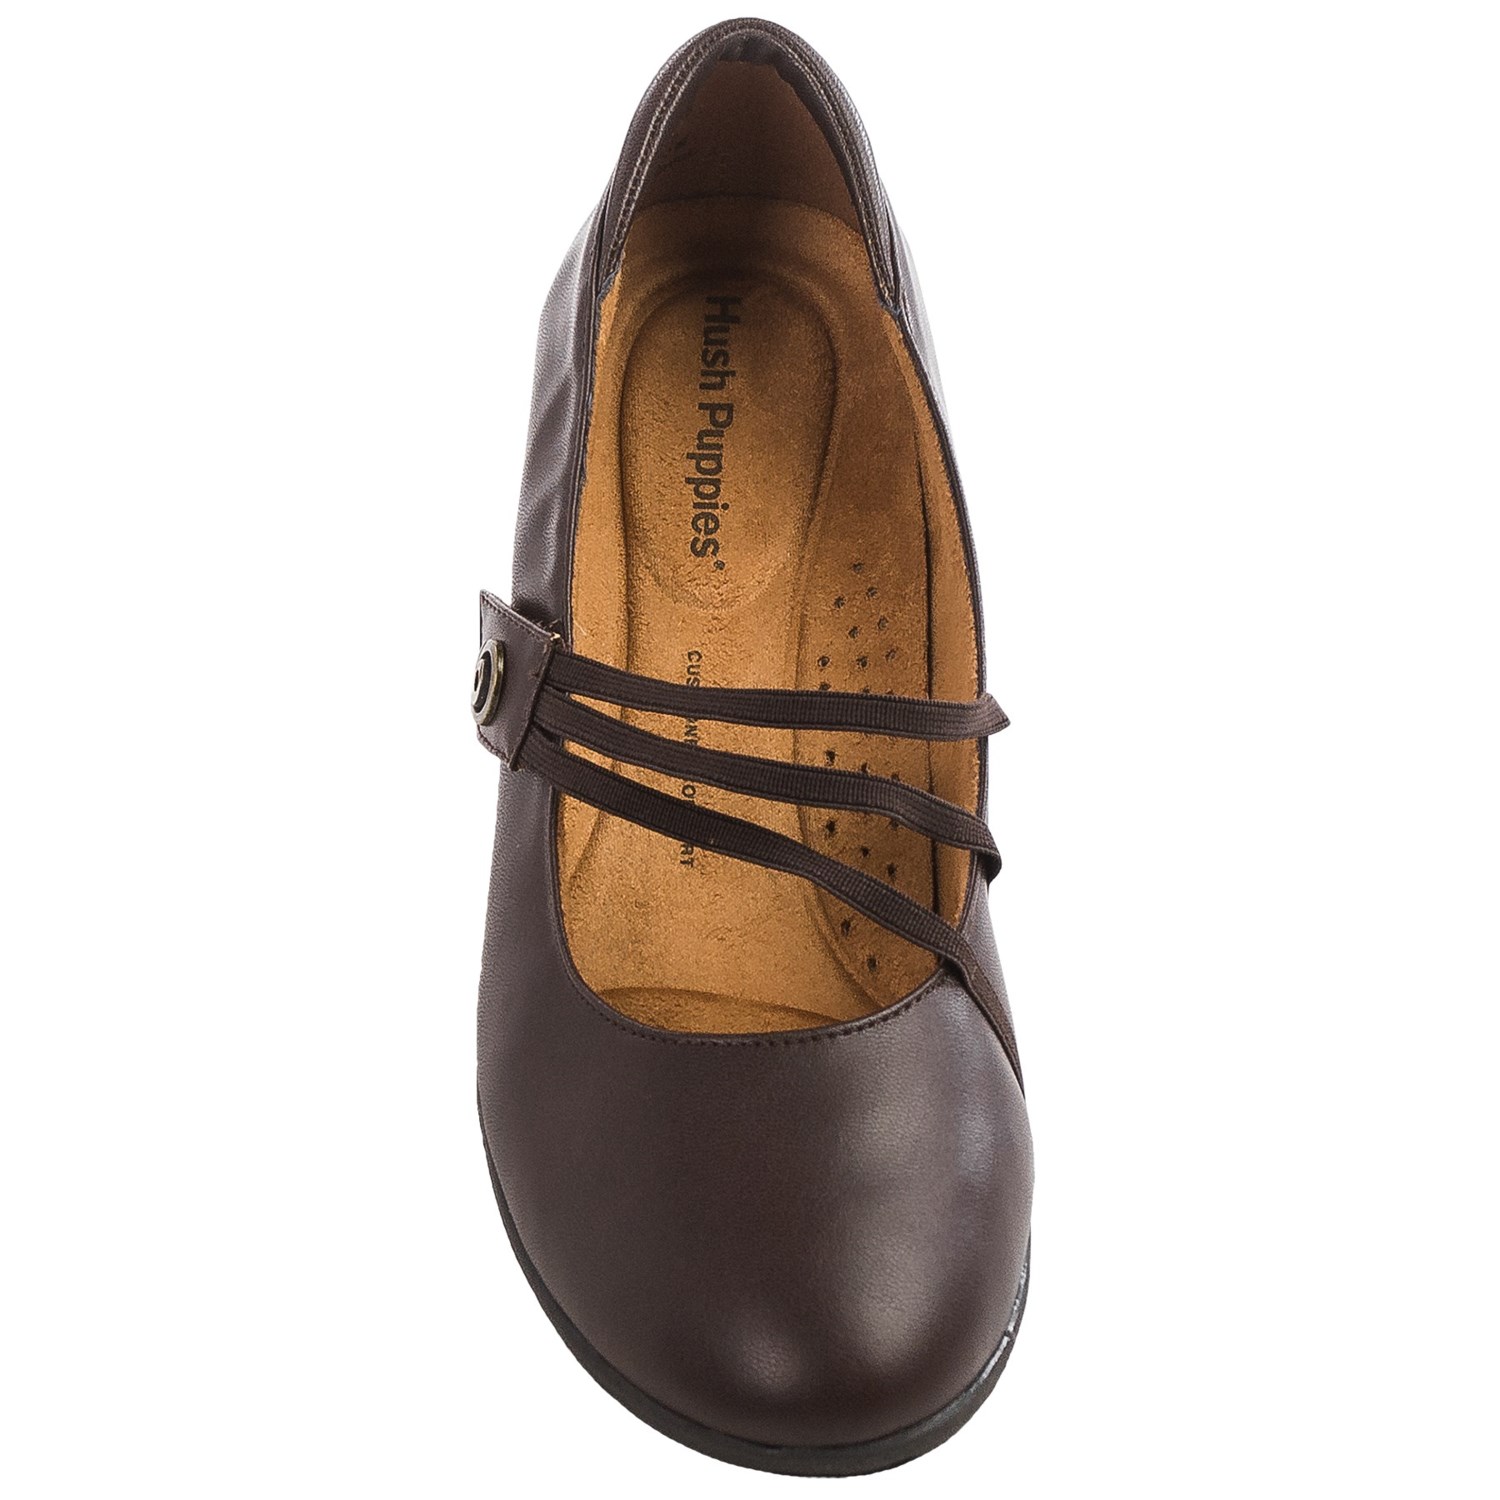 Hush Puppies Finn Rowley Mary Jane Shoes (For Women) - Save 49%